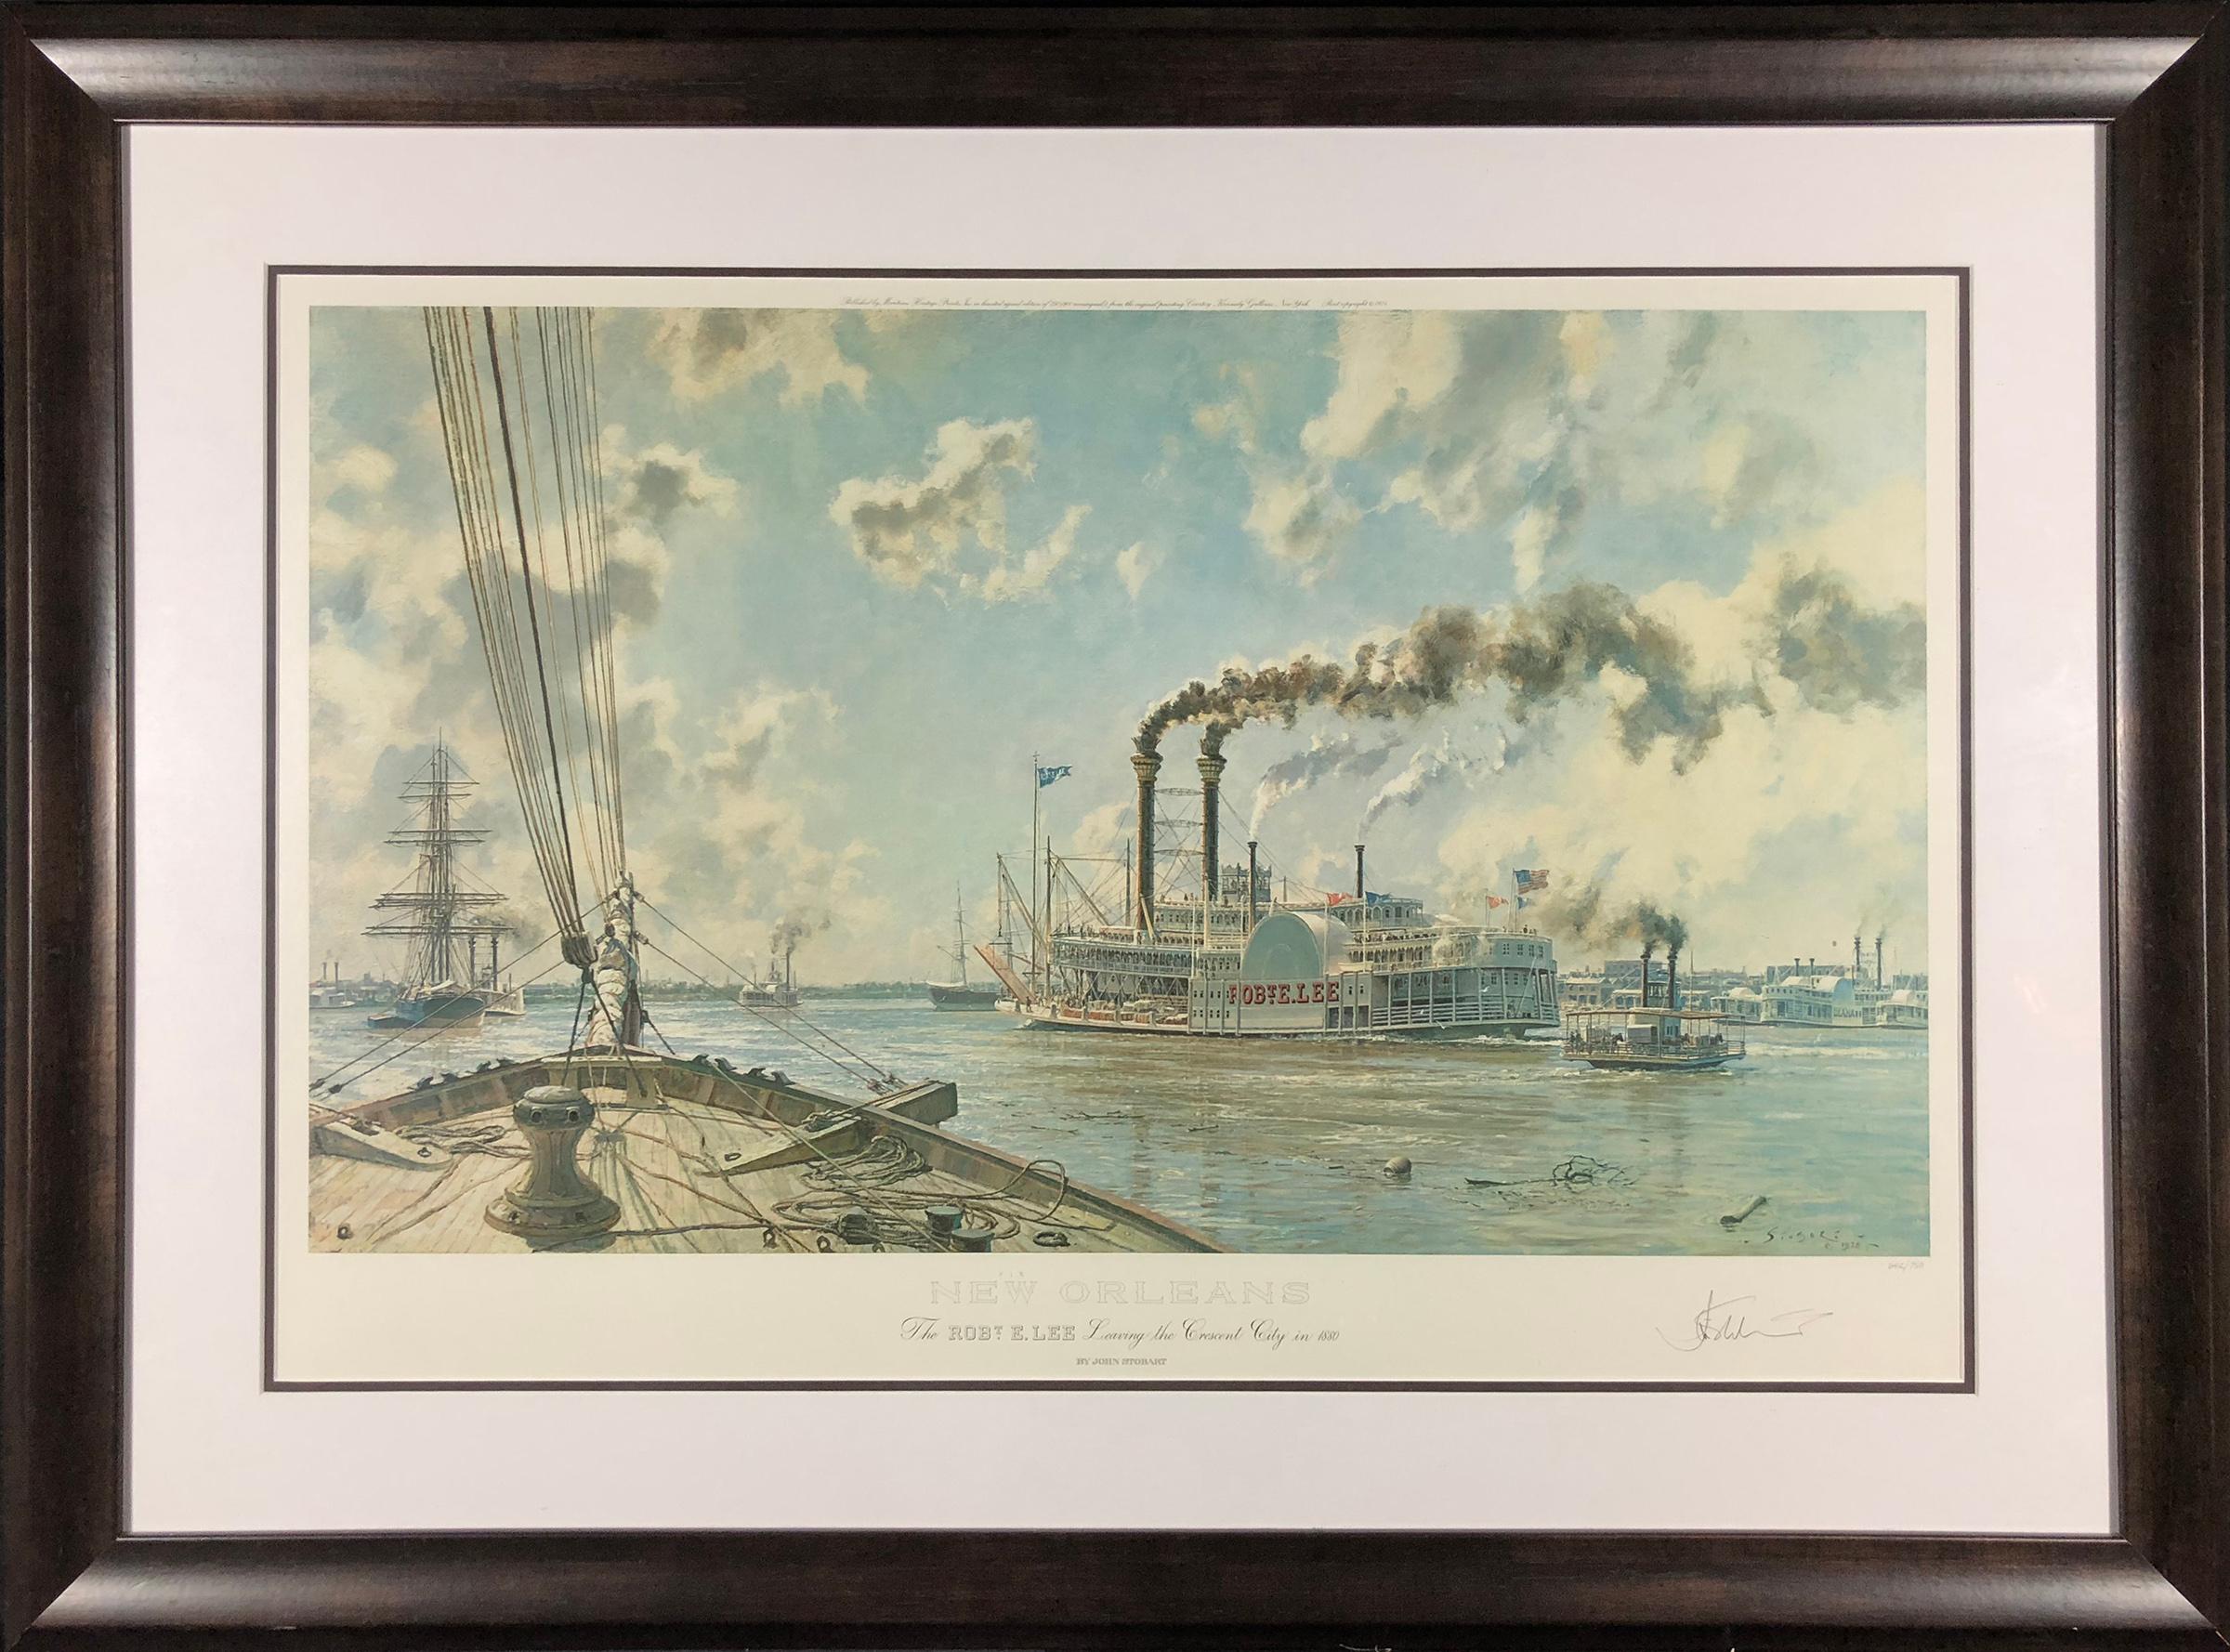 New Orleans - Robert E. Lee Leaving the Crescent City in 1880 - Print by John Stobart